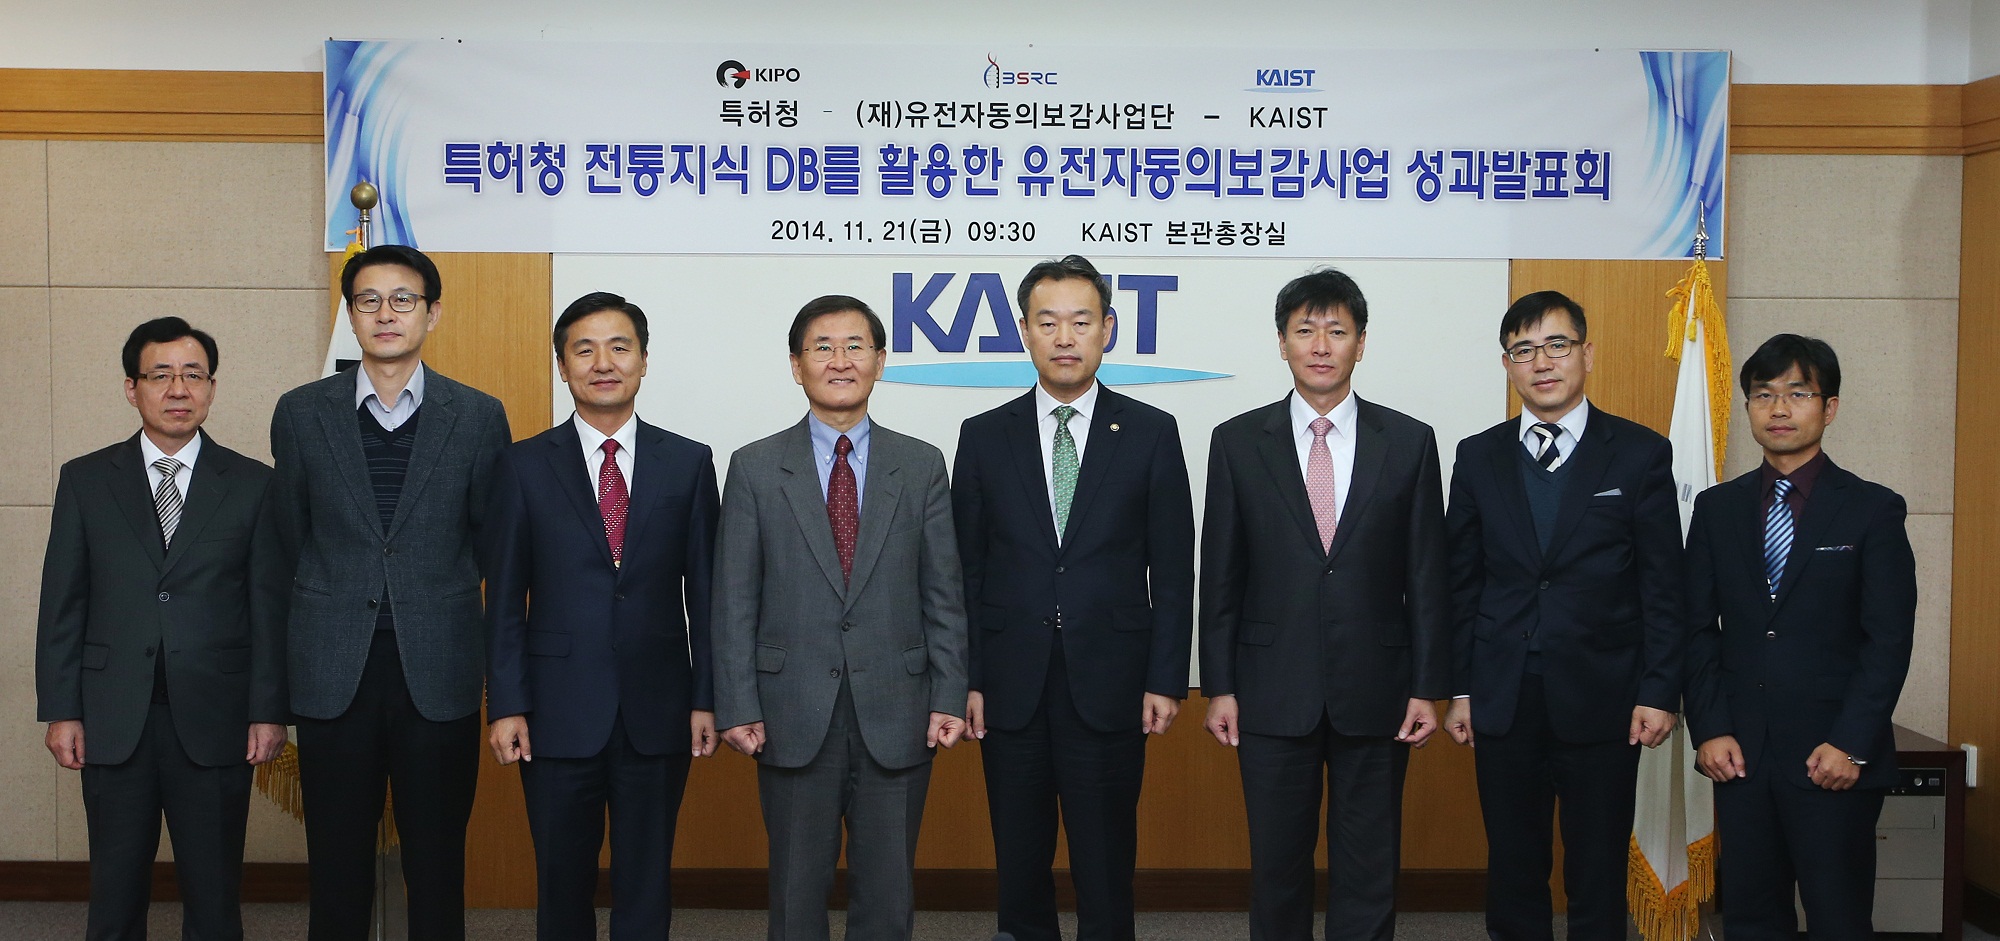 The Bio-Synergy Research Center, KAIST, Hosts an Annual Meeting 이미지